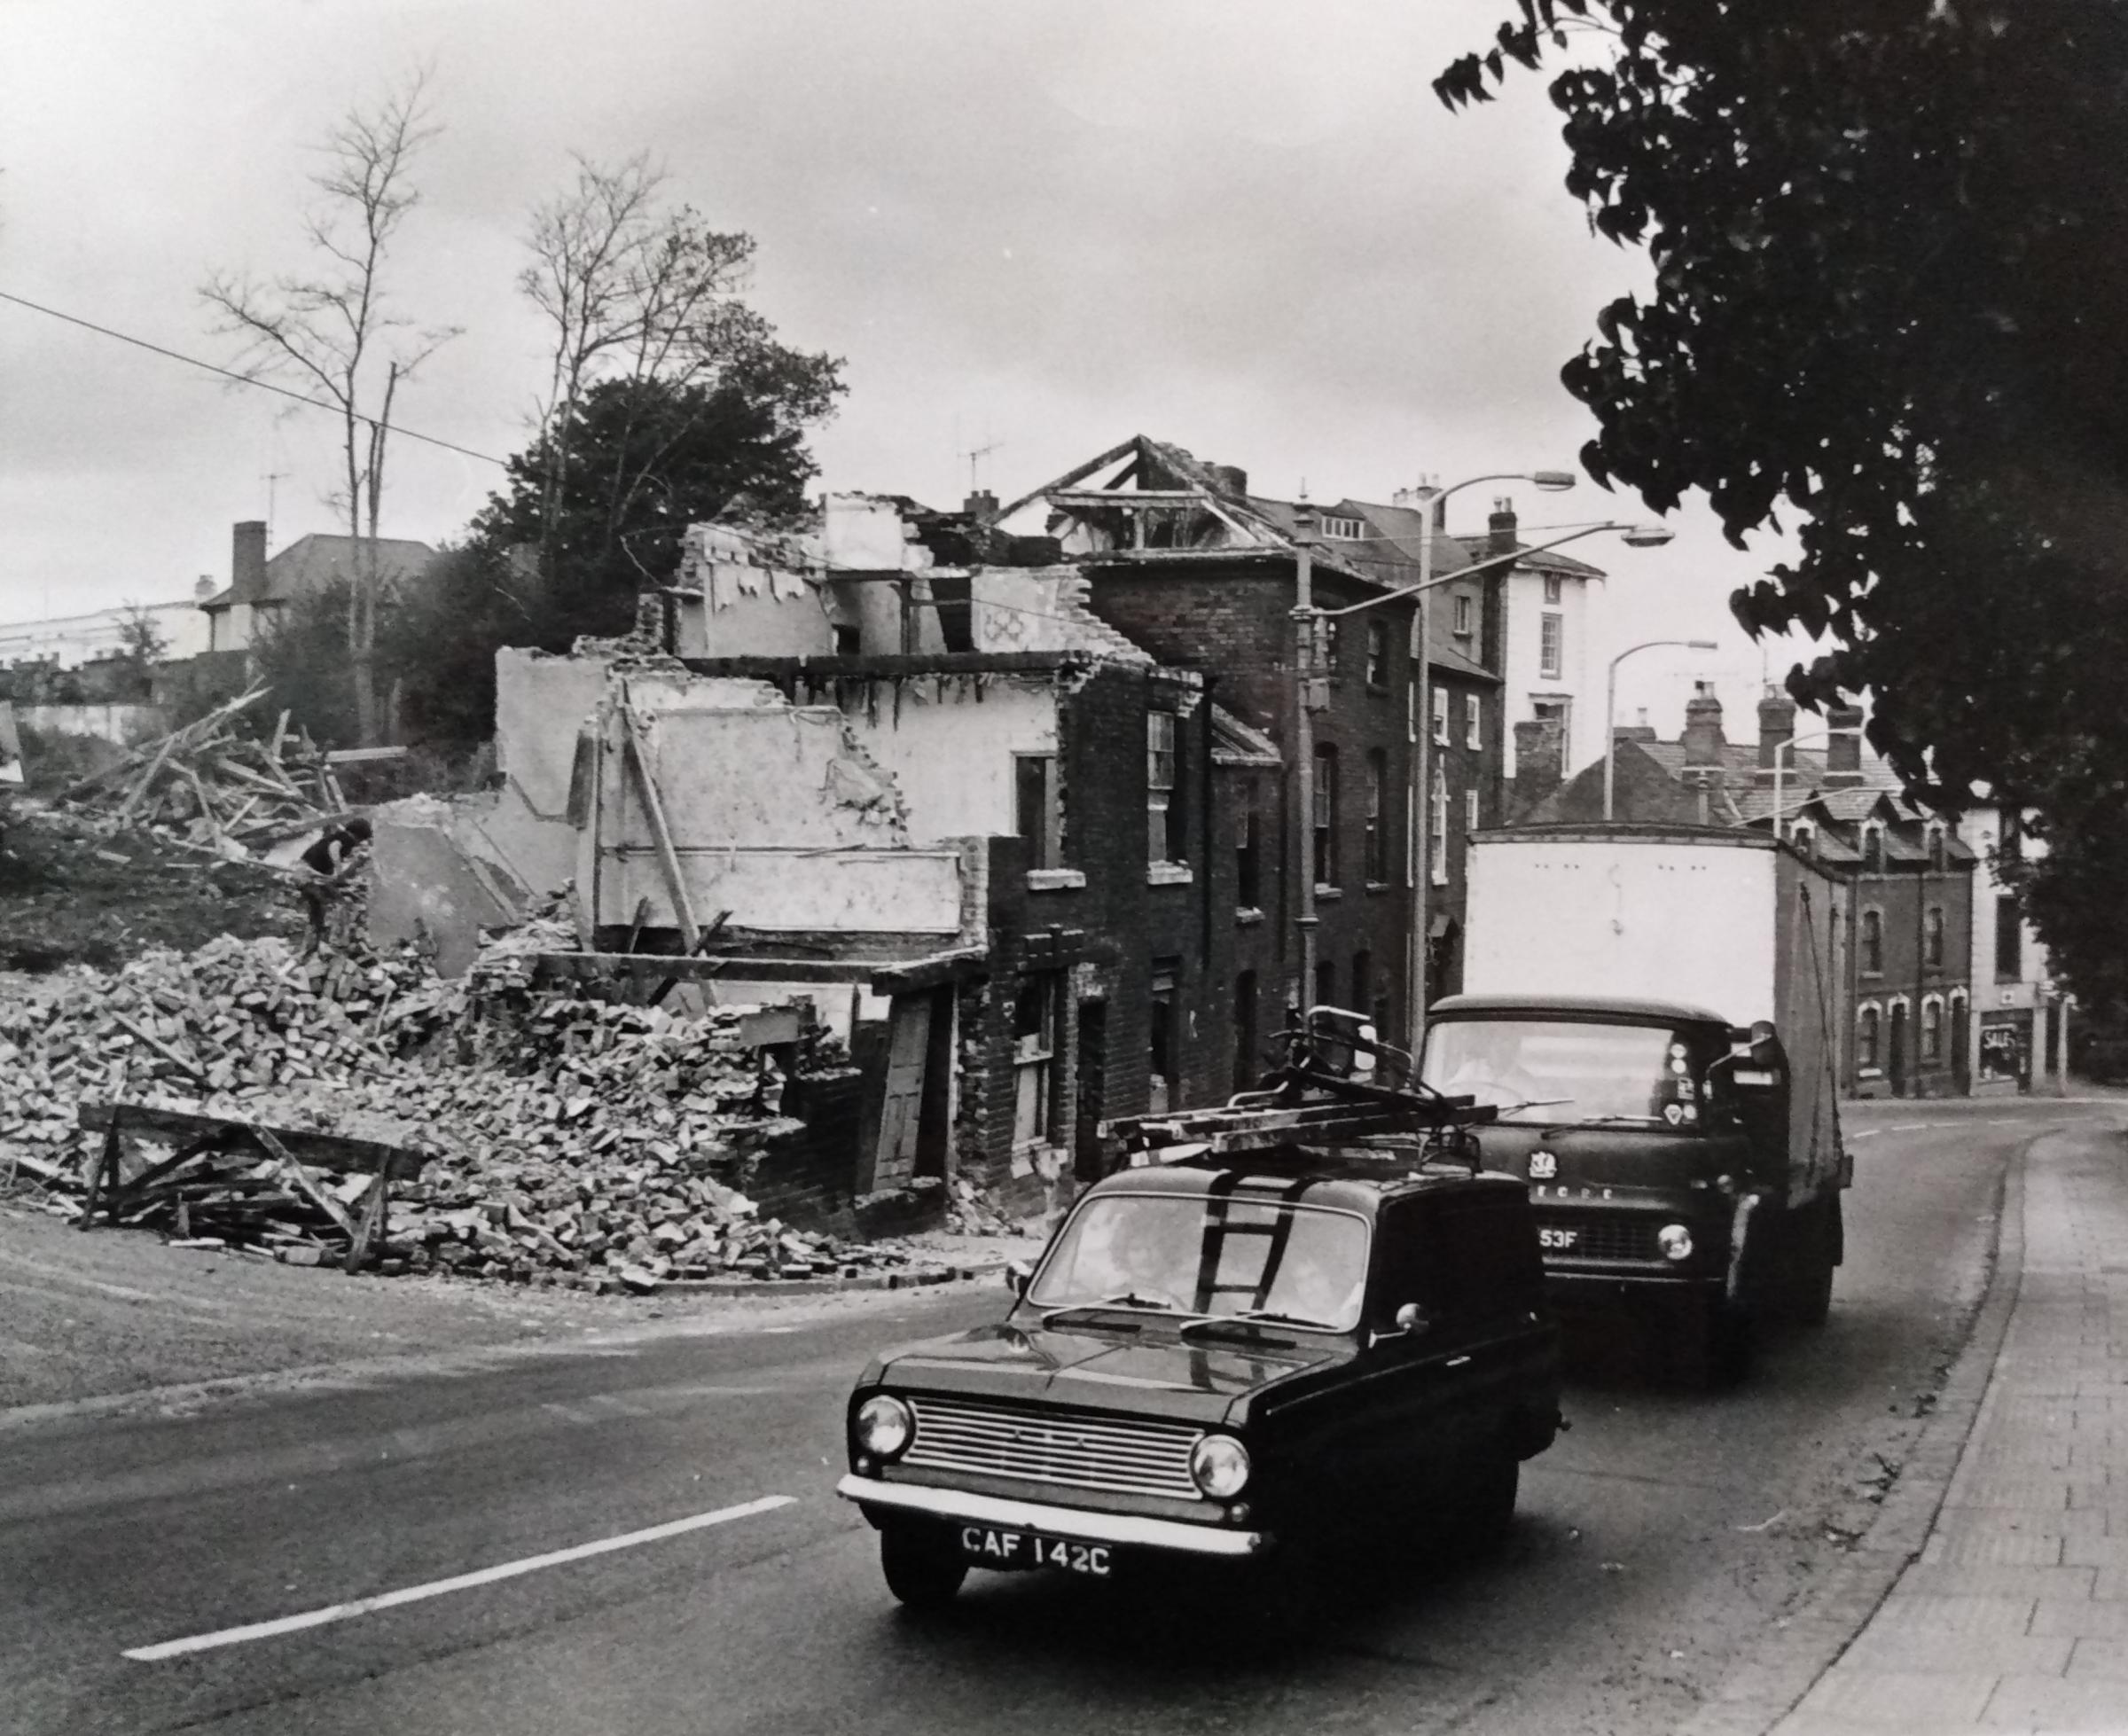 On the theme of demolition (we know we’re stretching things a bit here as this is actually London Road), at least the Georgian houses avoided the fate of this block of Victorian buildings in December 1971